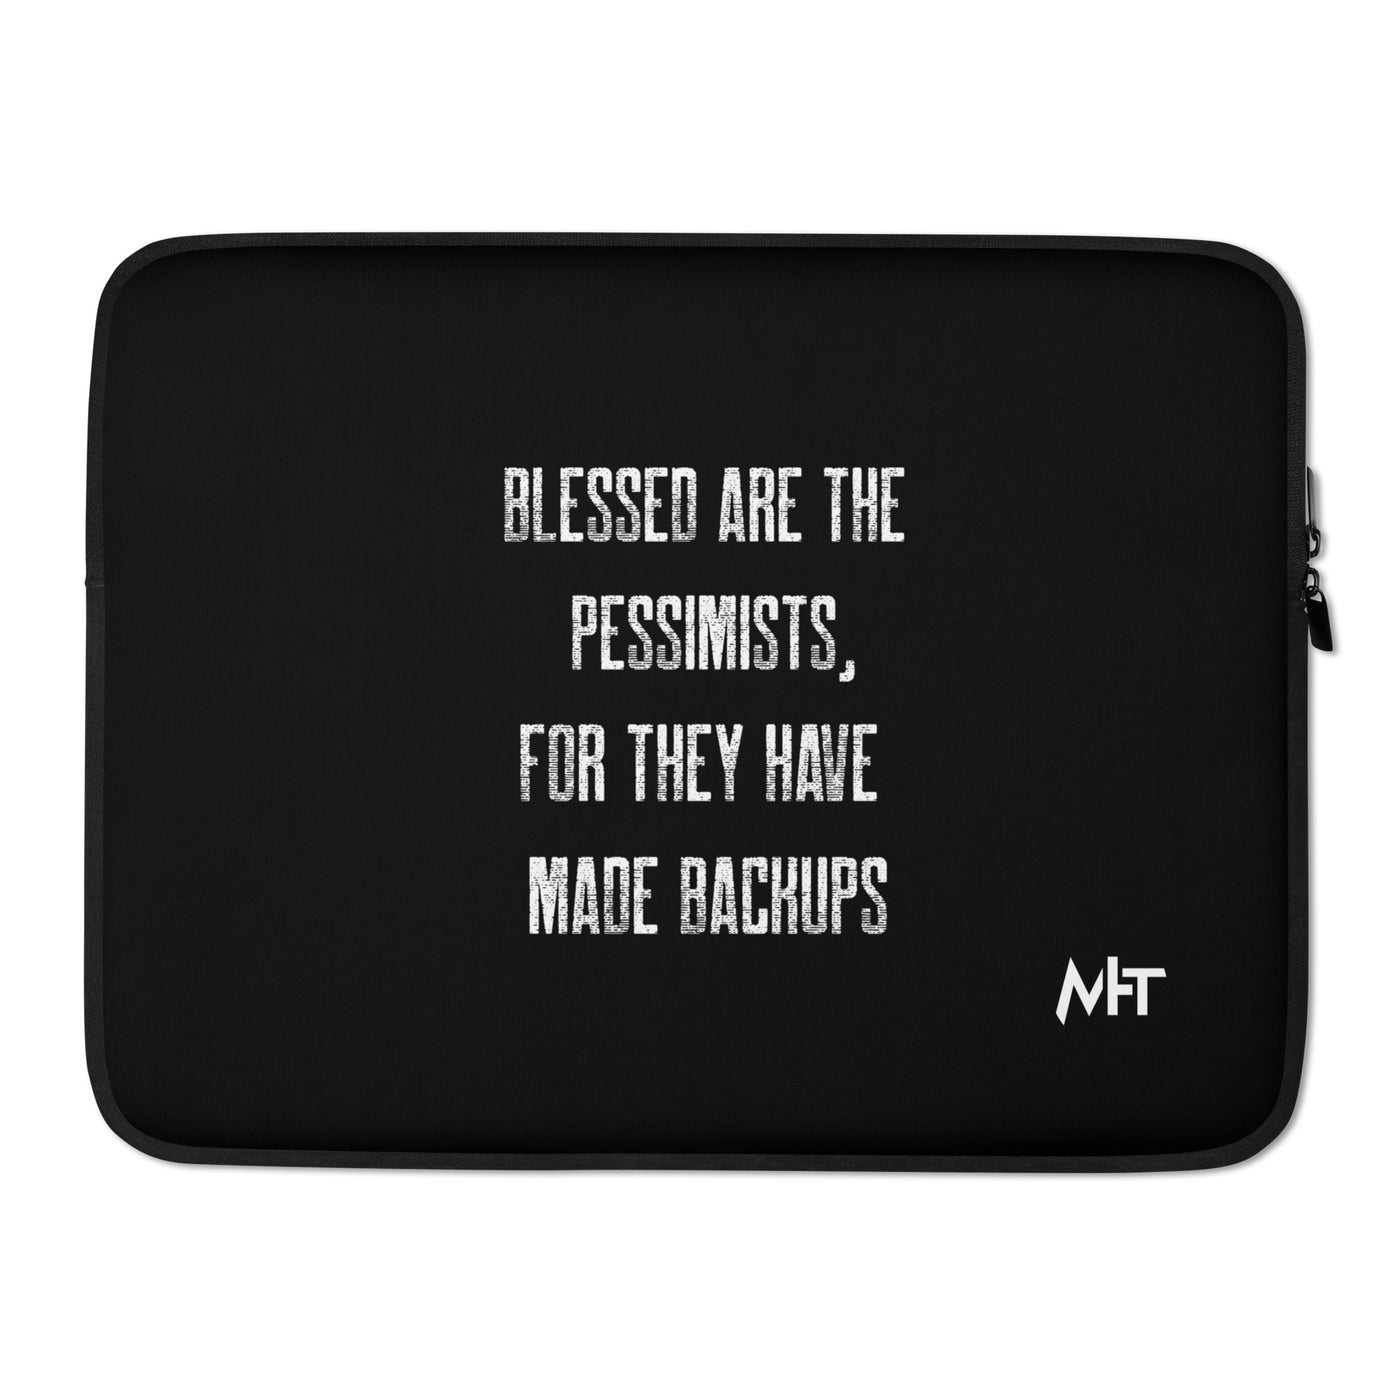 Blessed are the pessimists for they have made backups -Laptop Sleeve